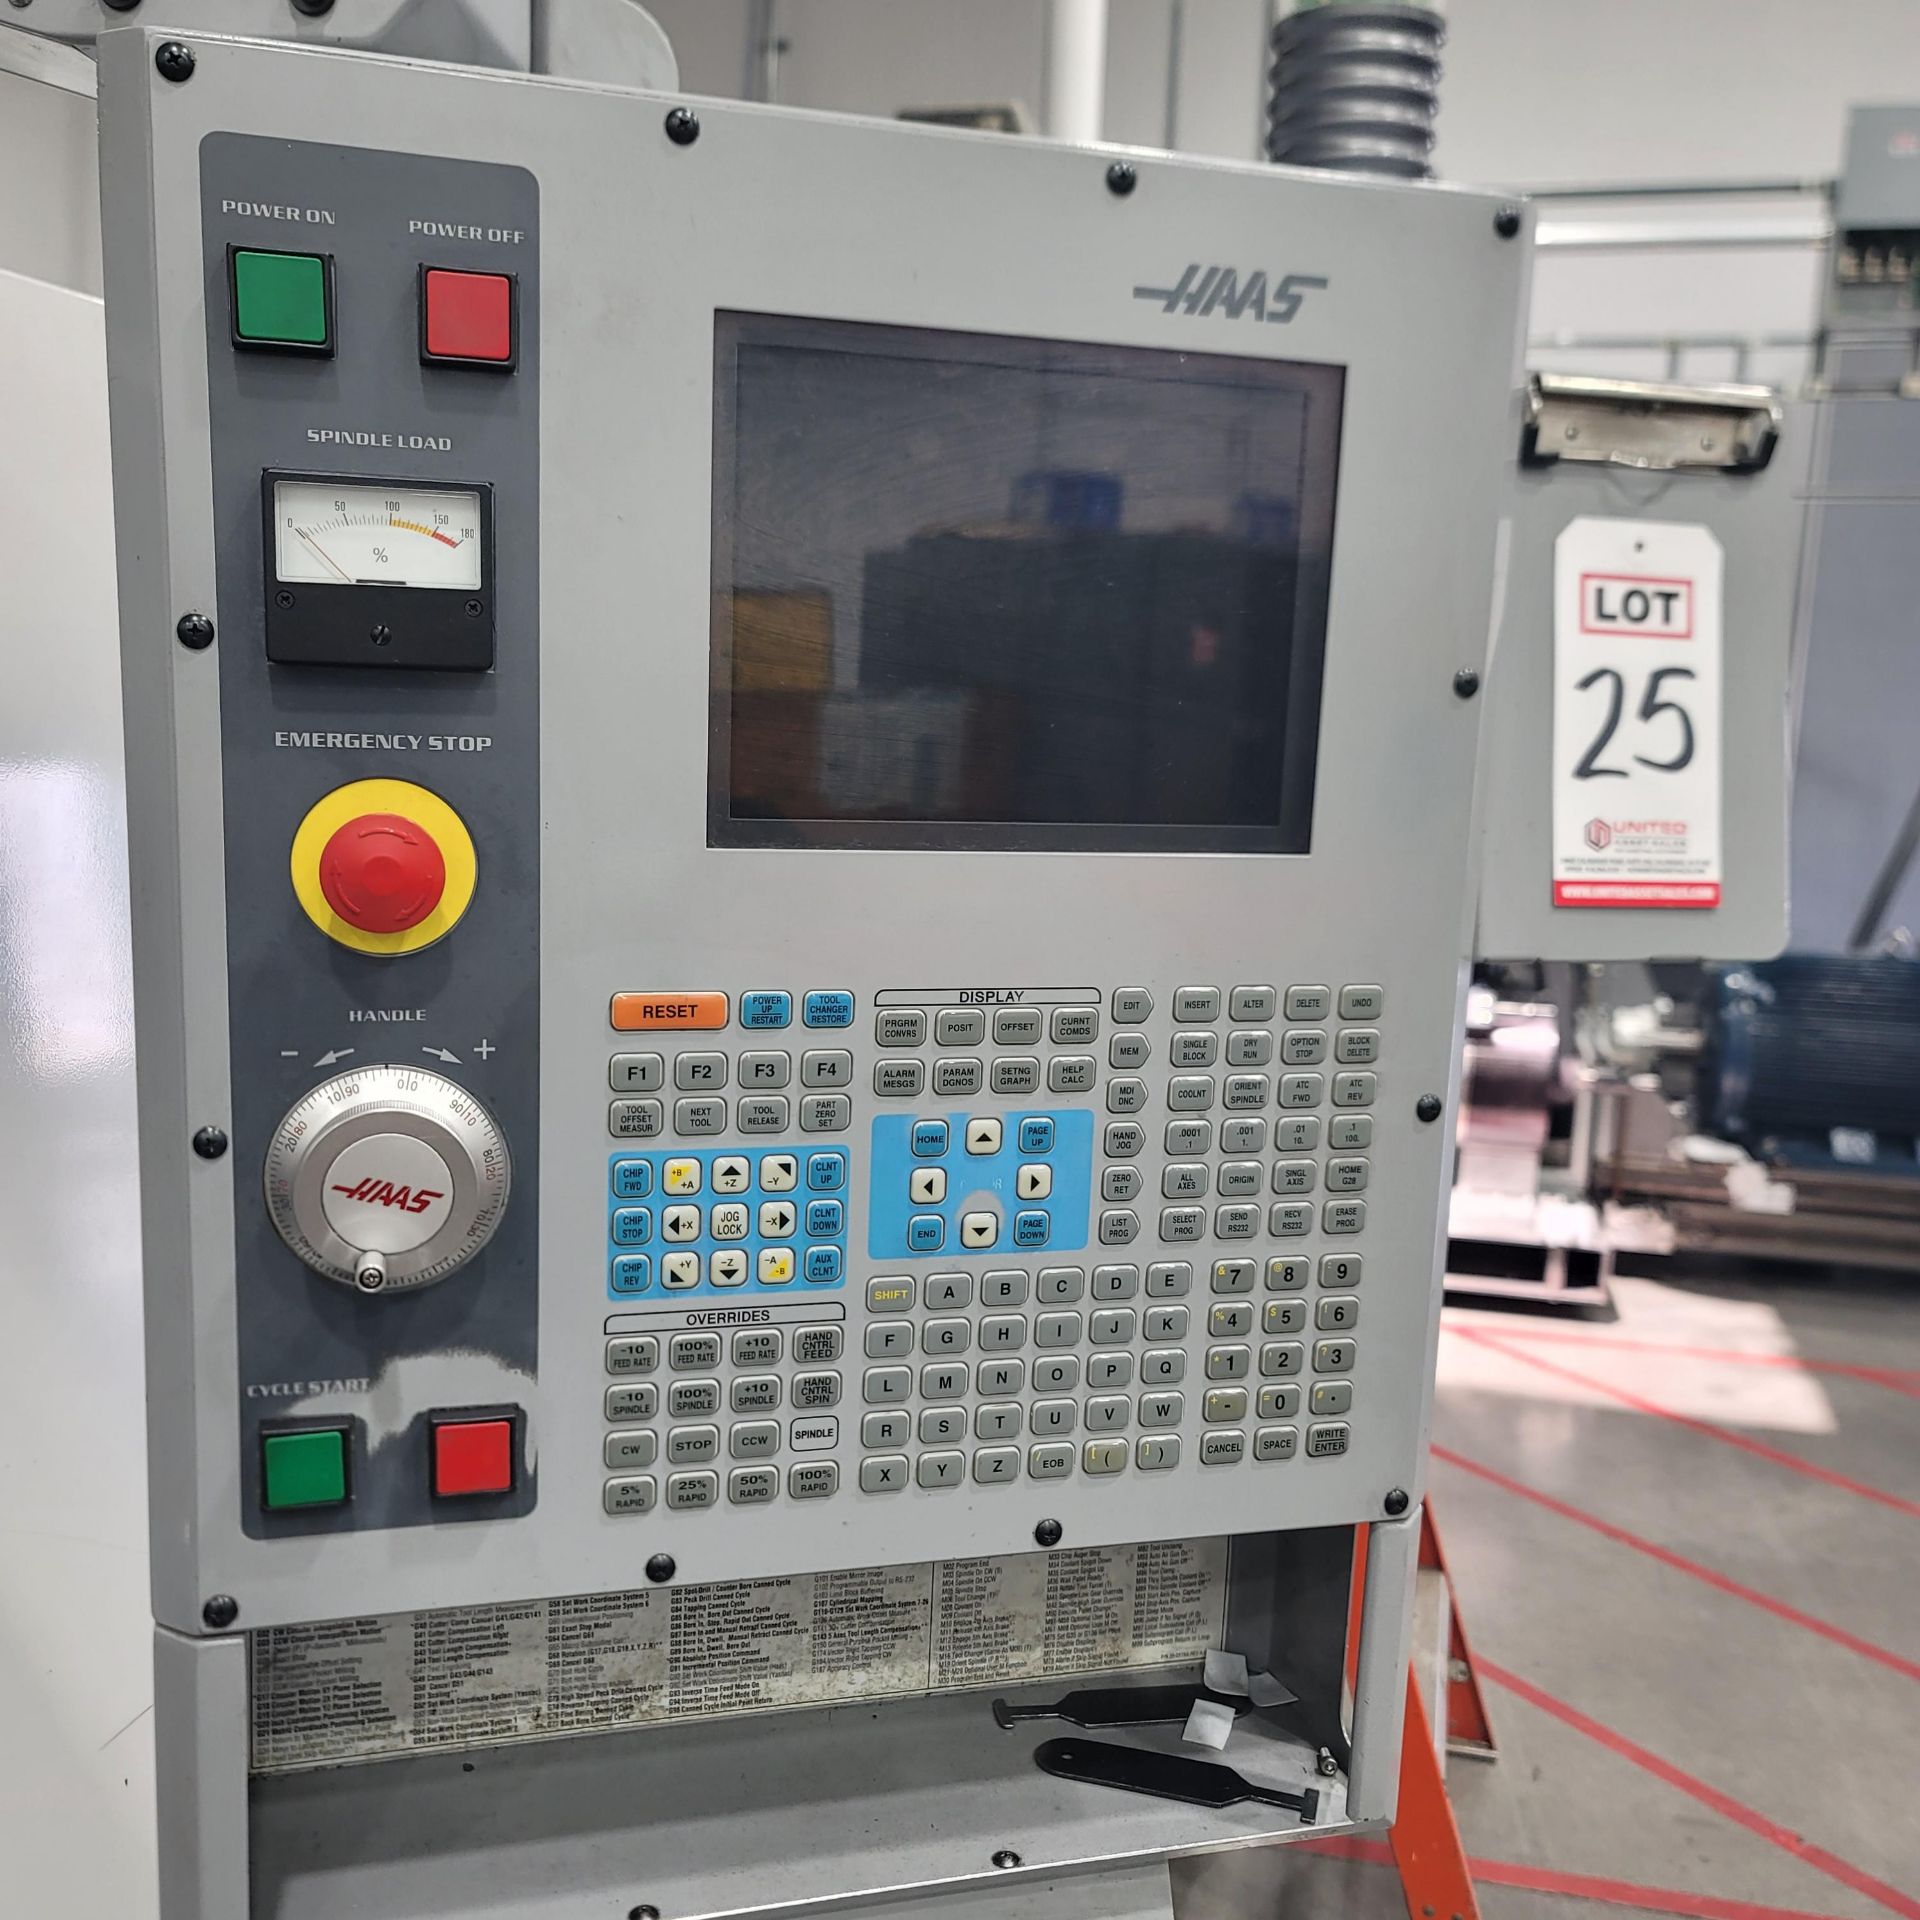 2003 HAAS VF-4D VERTICAL MACHINING CENTER, XYZ TRAVELS: 50" X 20" X 25", TABLE SIZE: 52" X 18", - Image 8 of 10